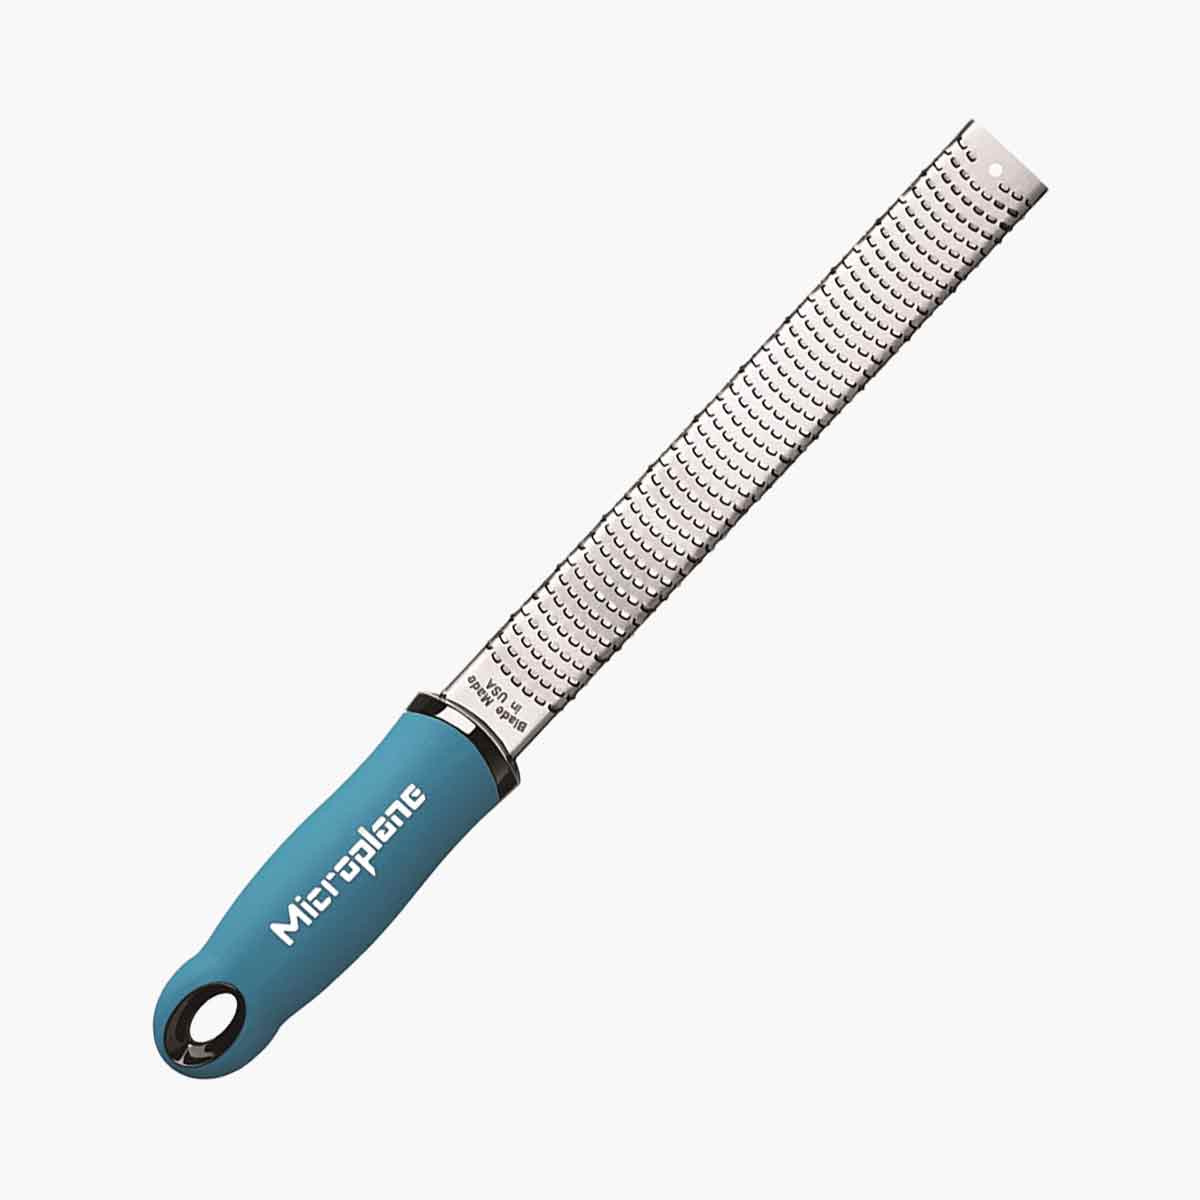 A blue handled Microplane premium classic series zester grater.